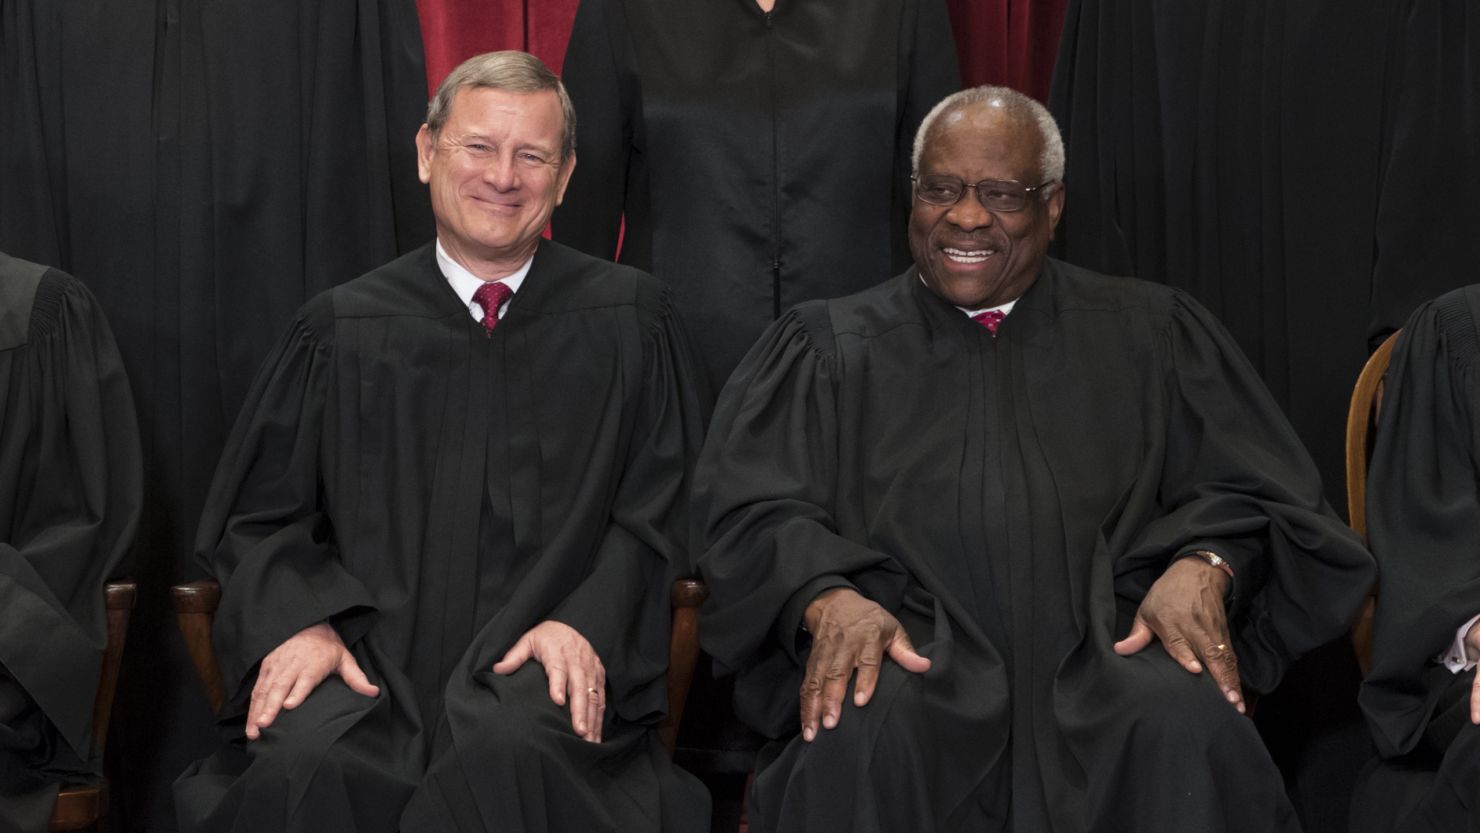 The justices of the U.S. Supreme Court gather for an official group portrait to include new Associate Justice Neil Gorsuch, top row, far right, Thursday. June 1, 2017, at the Supreme Court Building in Washington. Seated, from left are, Associate Justice Ruth Bader Ginsburg, Associate Justice Anthony Kennedy, Chief Justice John Roberts, Associate Justice Clarence Thomas, and Associate Justice Stephen Breyer. Standing in top row are, from left, Associate Justice Elena Kagan, Associate Justice Samuel Alito Jr., Associate Justice Sonia Sotomayor, and Associate Justice Neil Gorsuch. (AP Photo/J. Scott Applewhite)